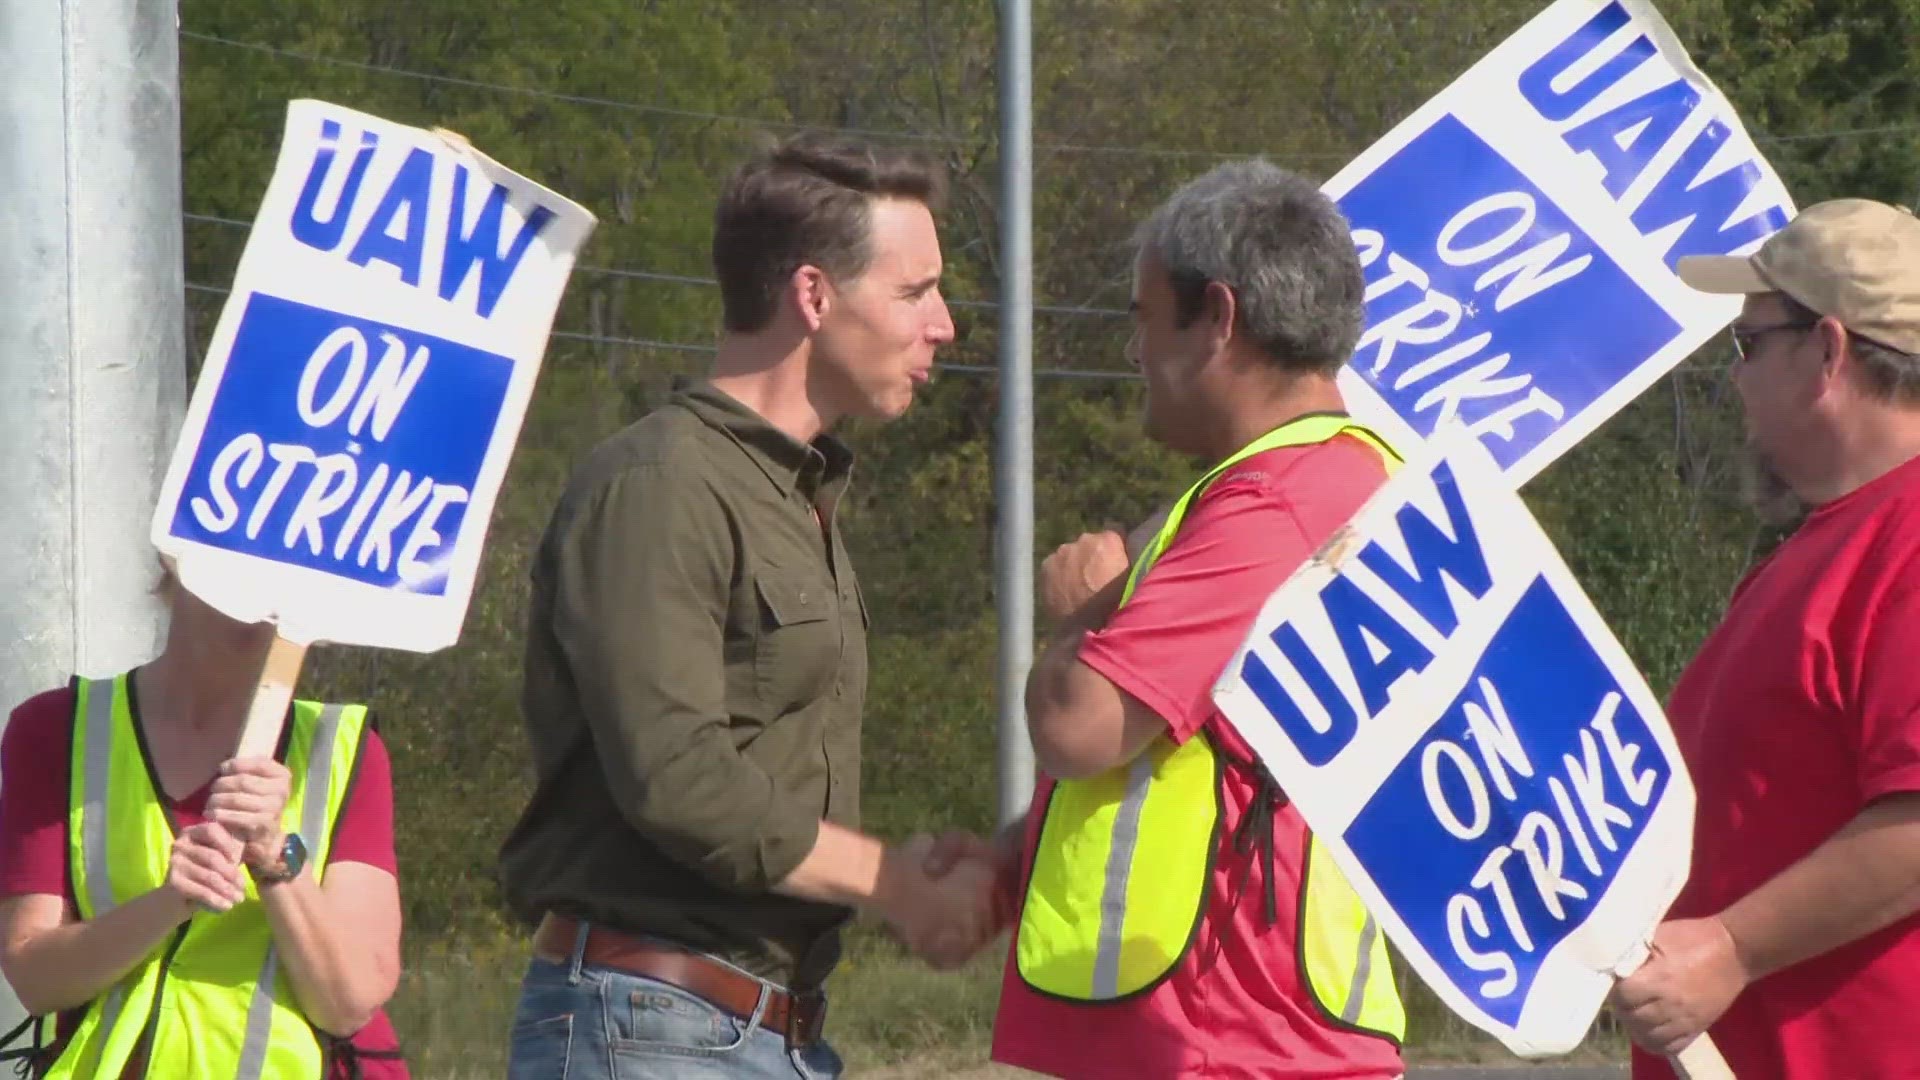 Republican U.S. Sen. Josh Hawley pounded the picket line at the General Motors Plan Monday afternoon in Wentzville, Missouri. He chatted and listened.